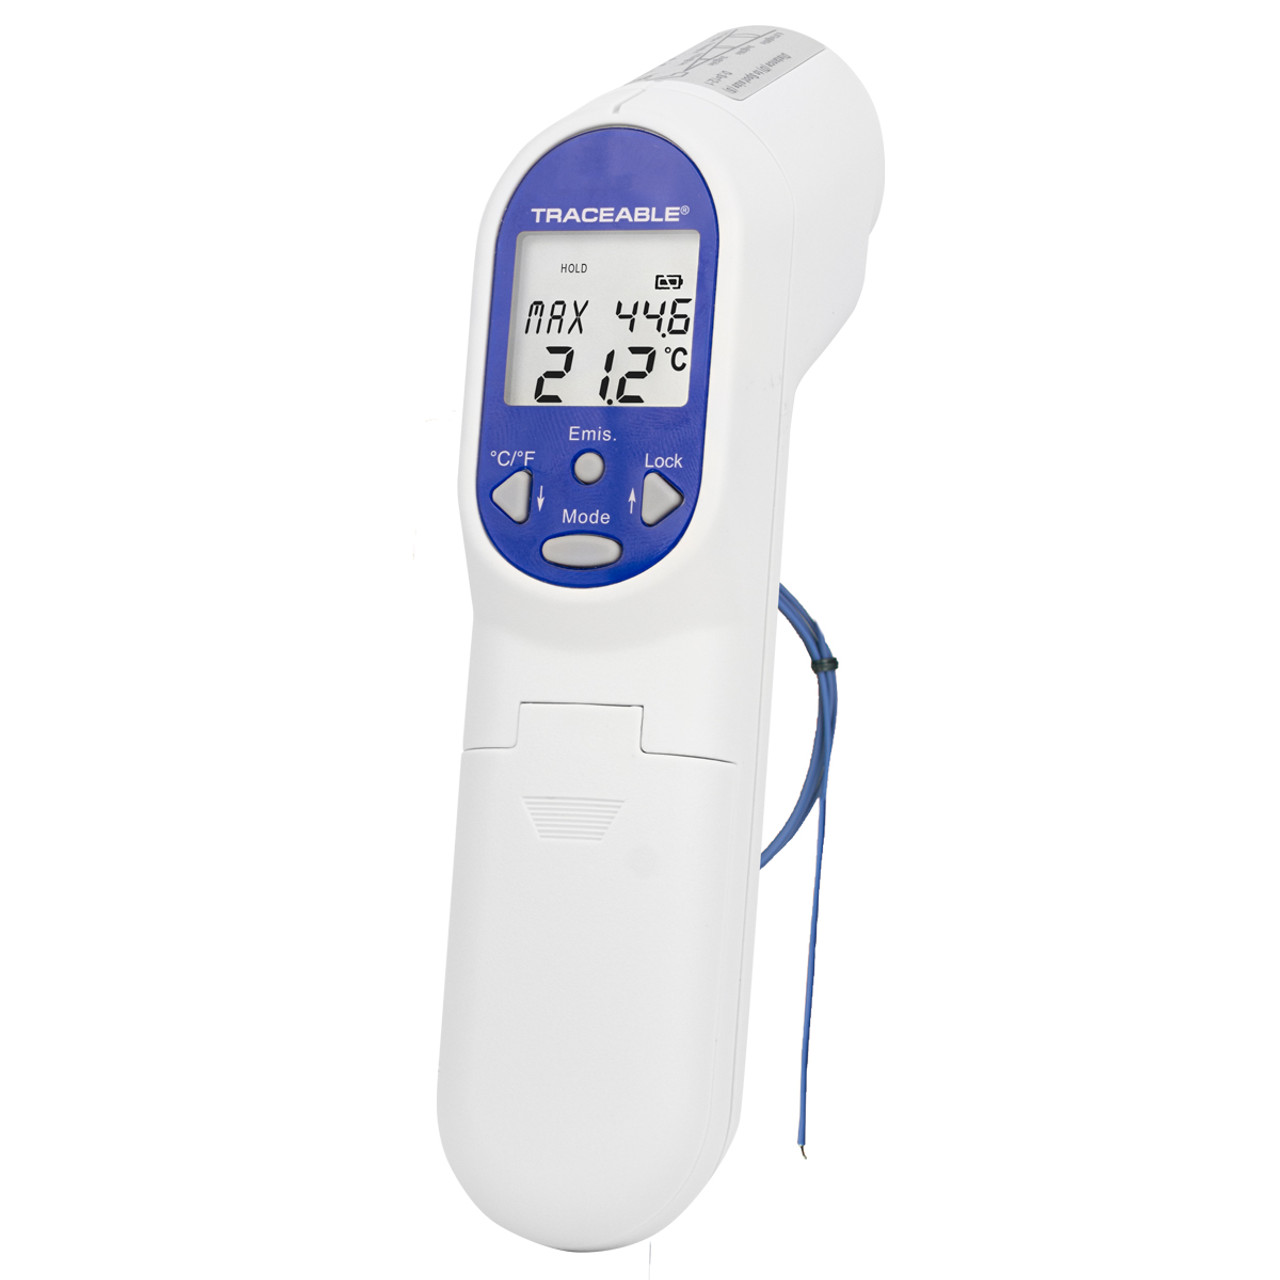 NIST Traceable Waterproof Digital Thermometer with Min/Max Feature  (Traceable)